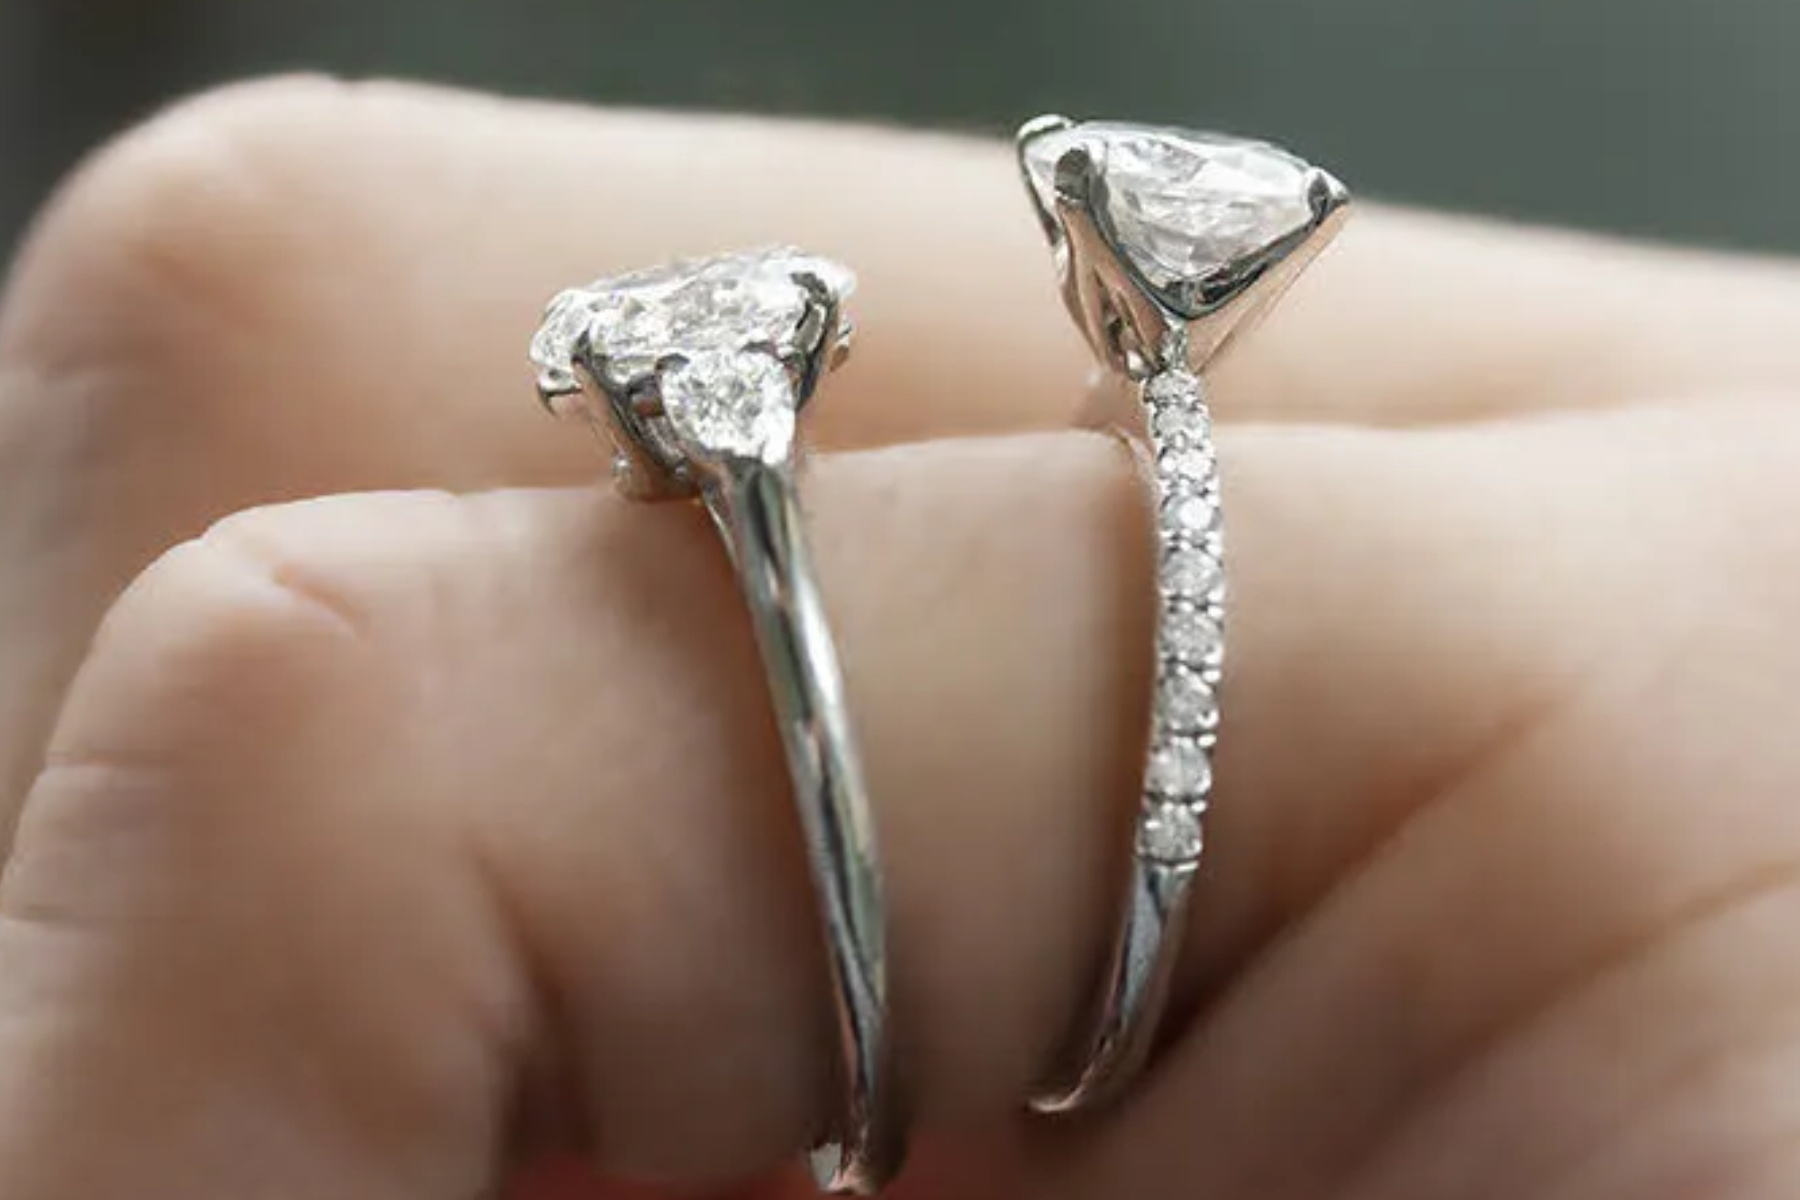 Low-profile Engagement Rings - A Minimalist's Dream